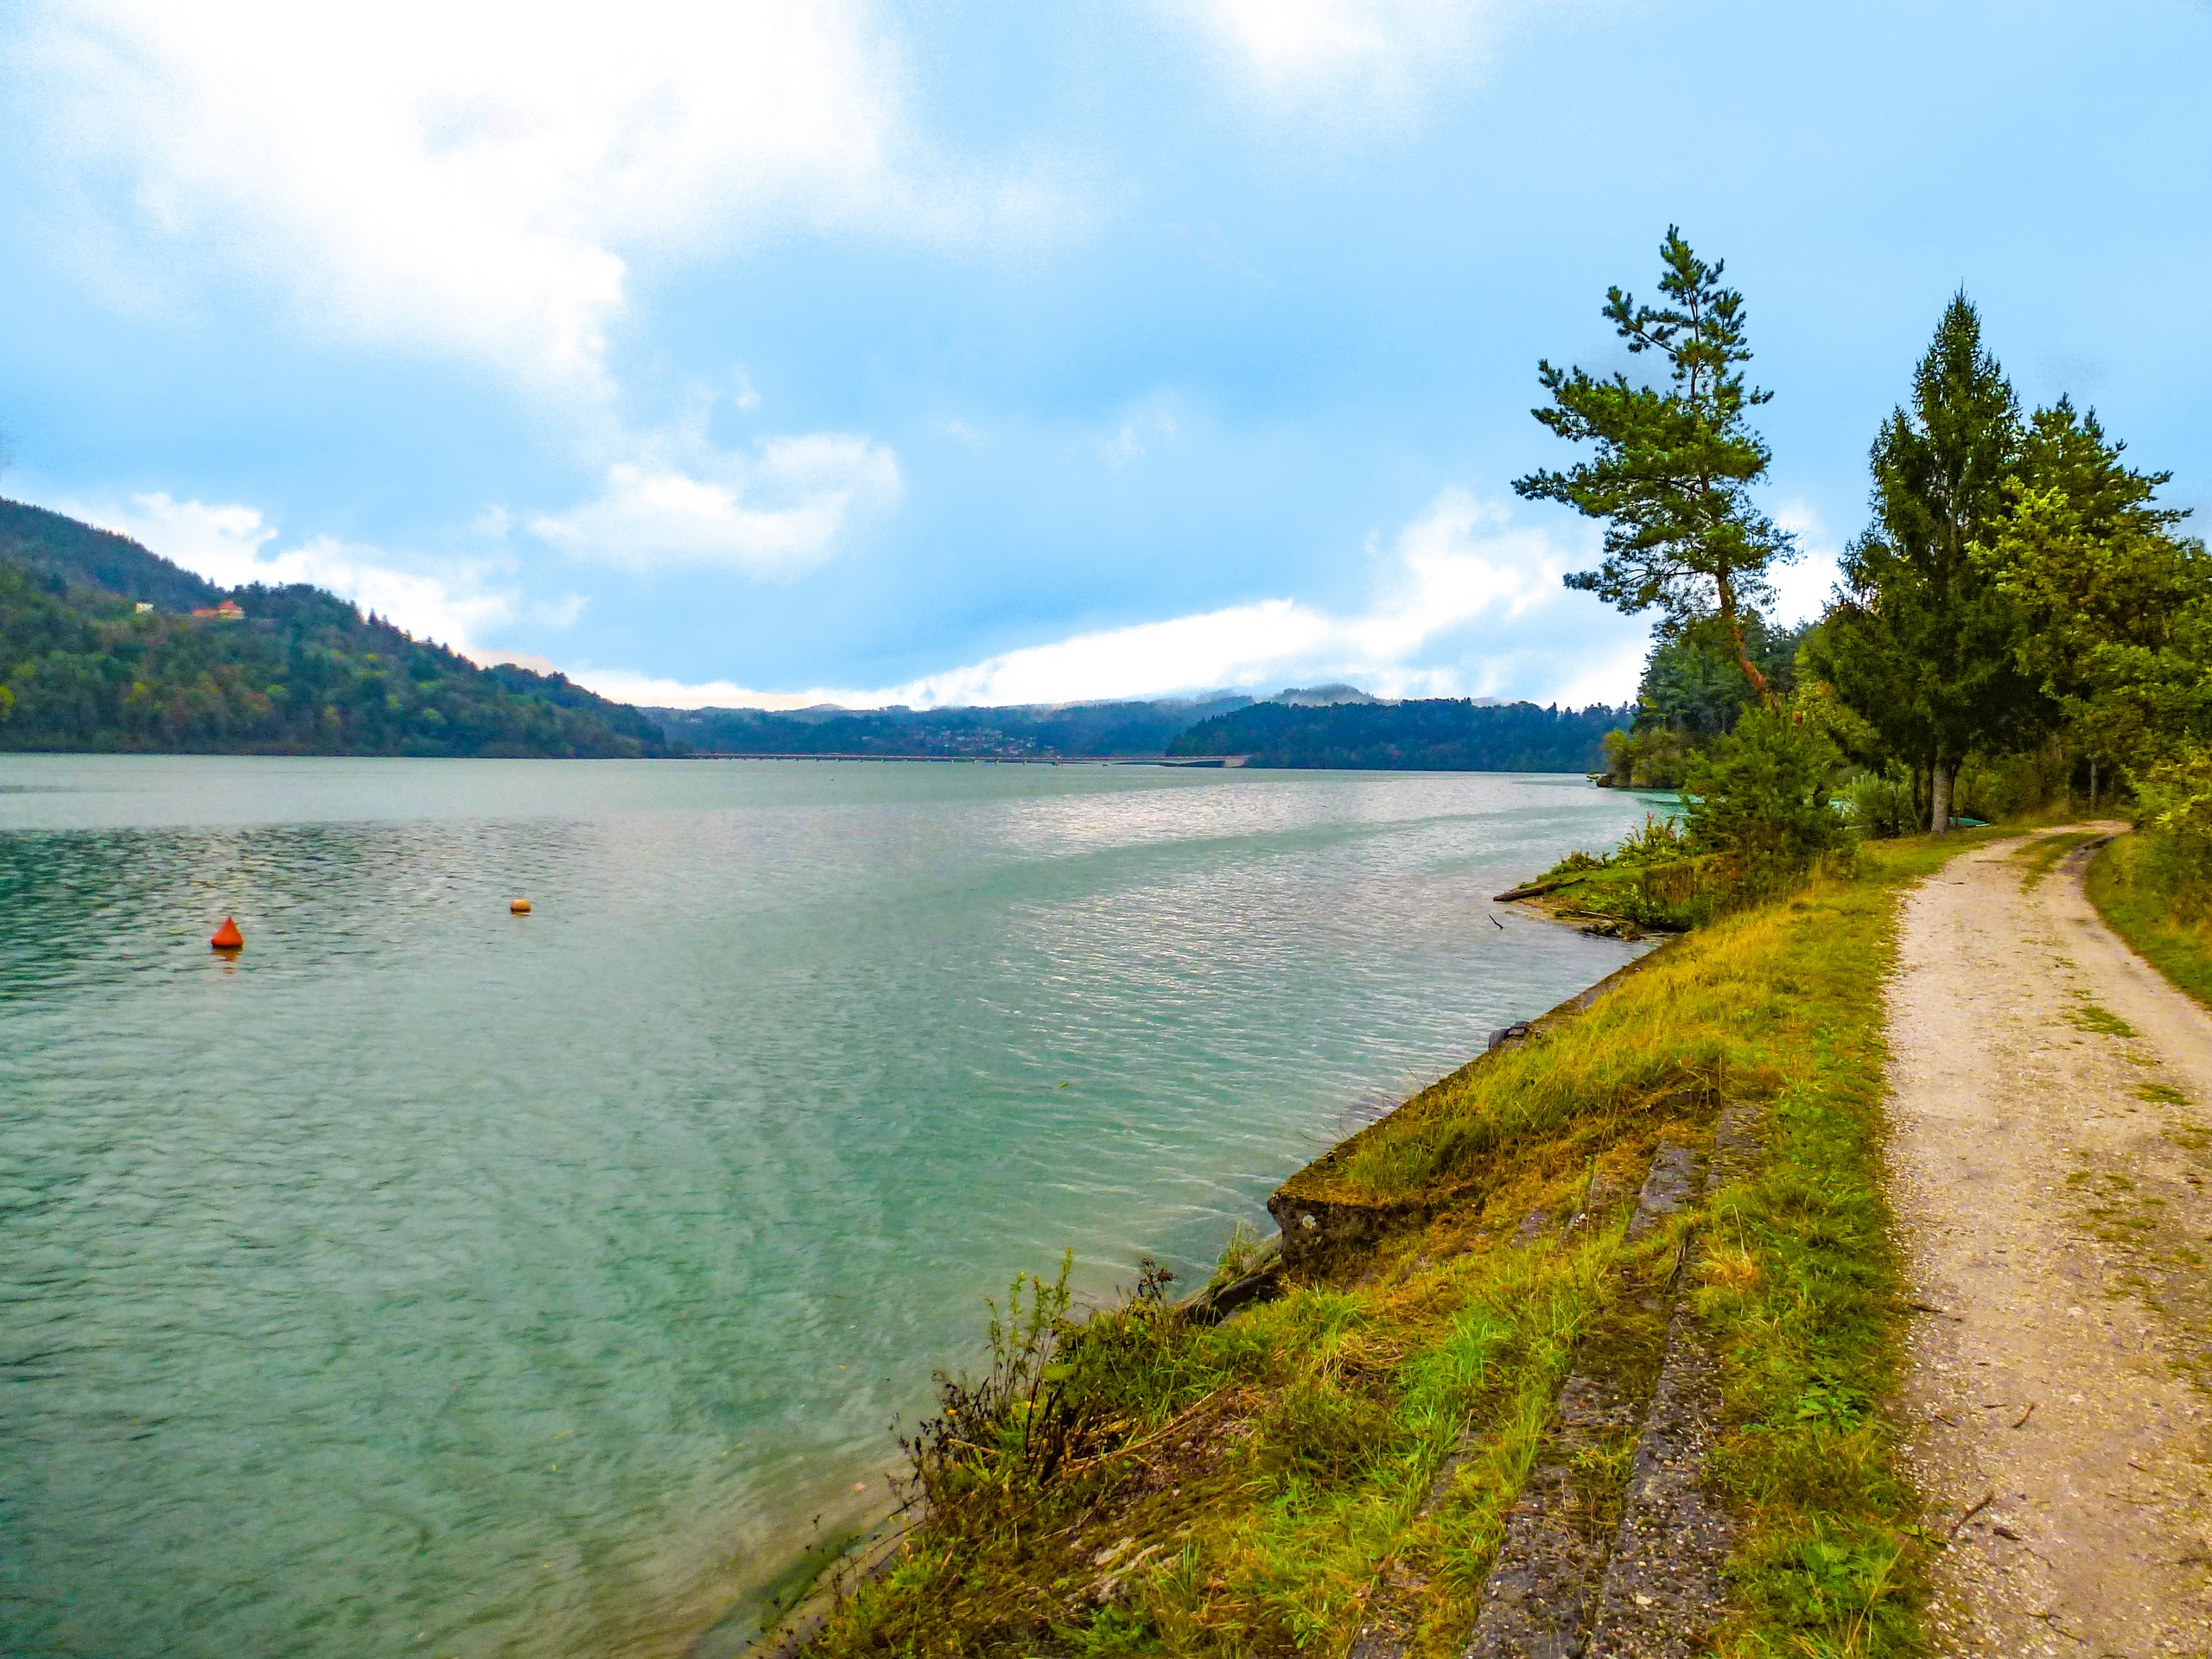 Cycling along one of the routes in Austria, Carinthian Lakes